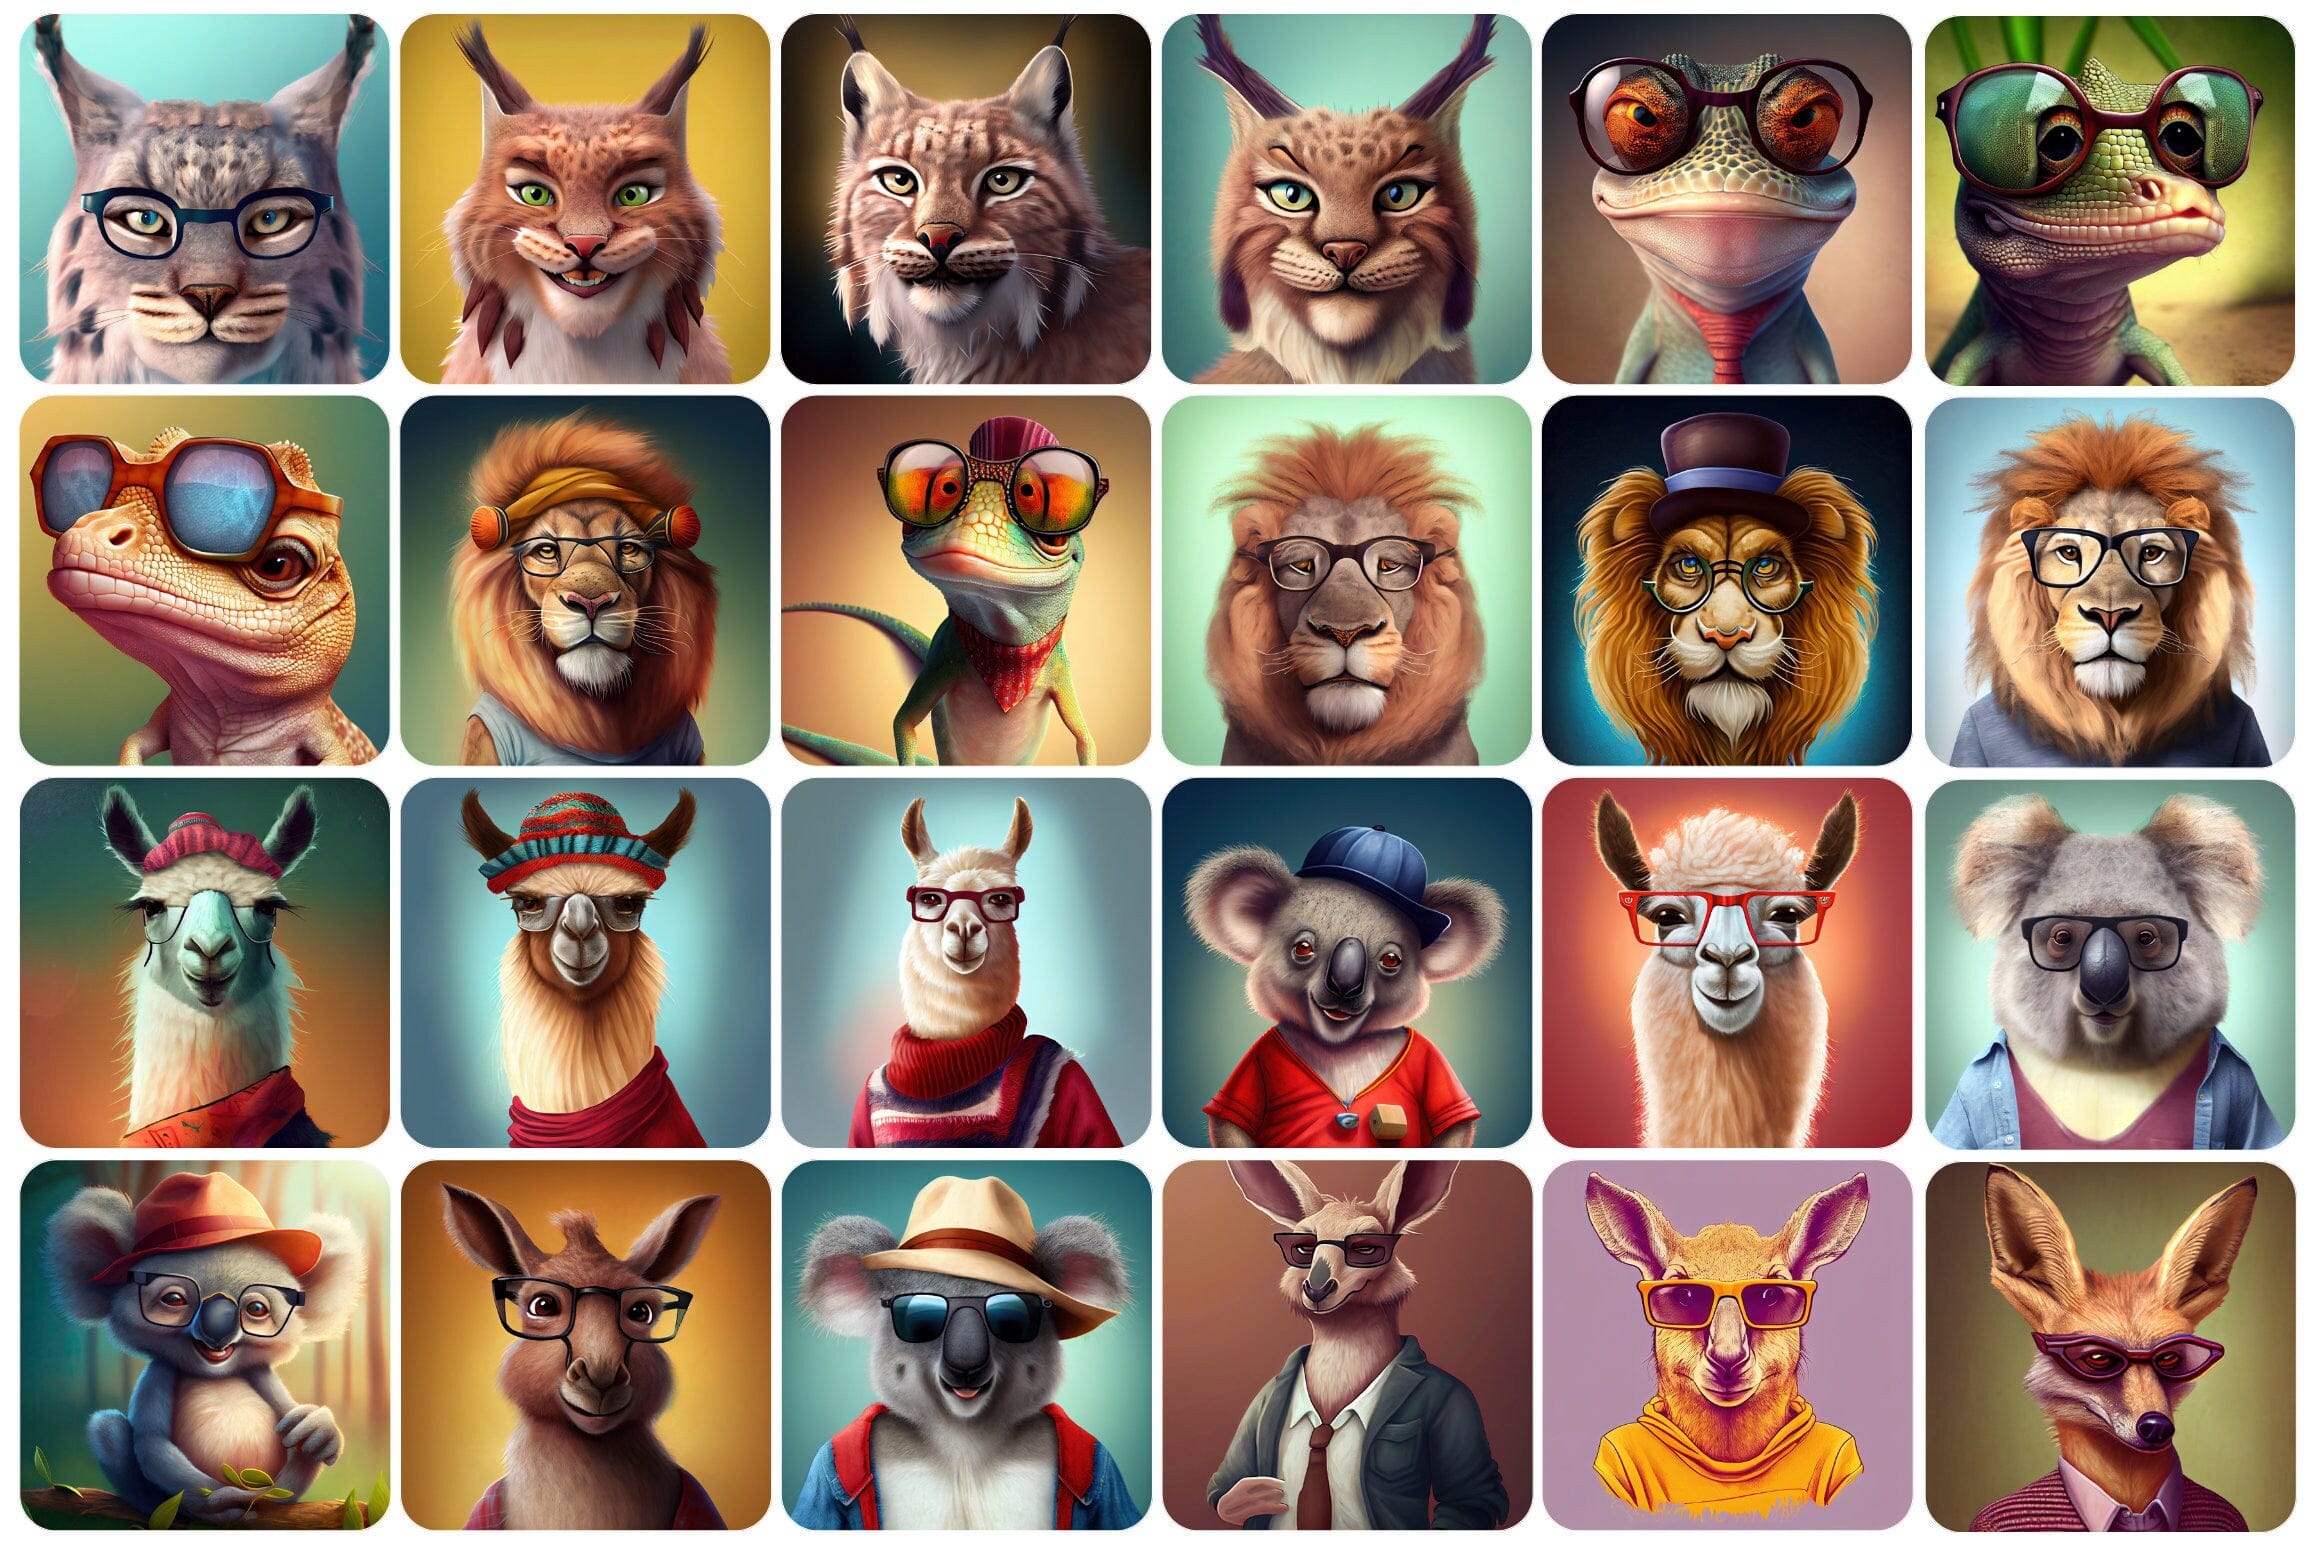 210 Printable Funny and Unique Animal Images - Perfect for Home Decor, Greeting Cards - Collection of Whimsical and Amusing Animal Photos Digital Download Sumobundle